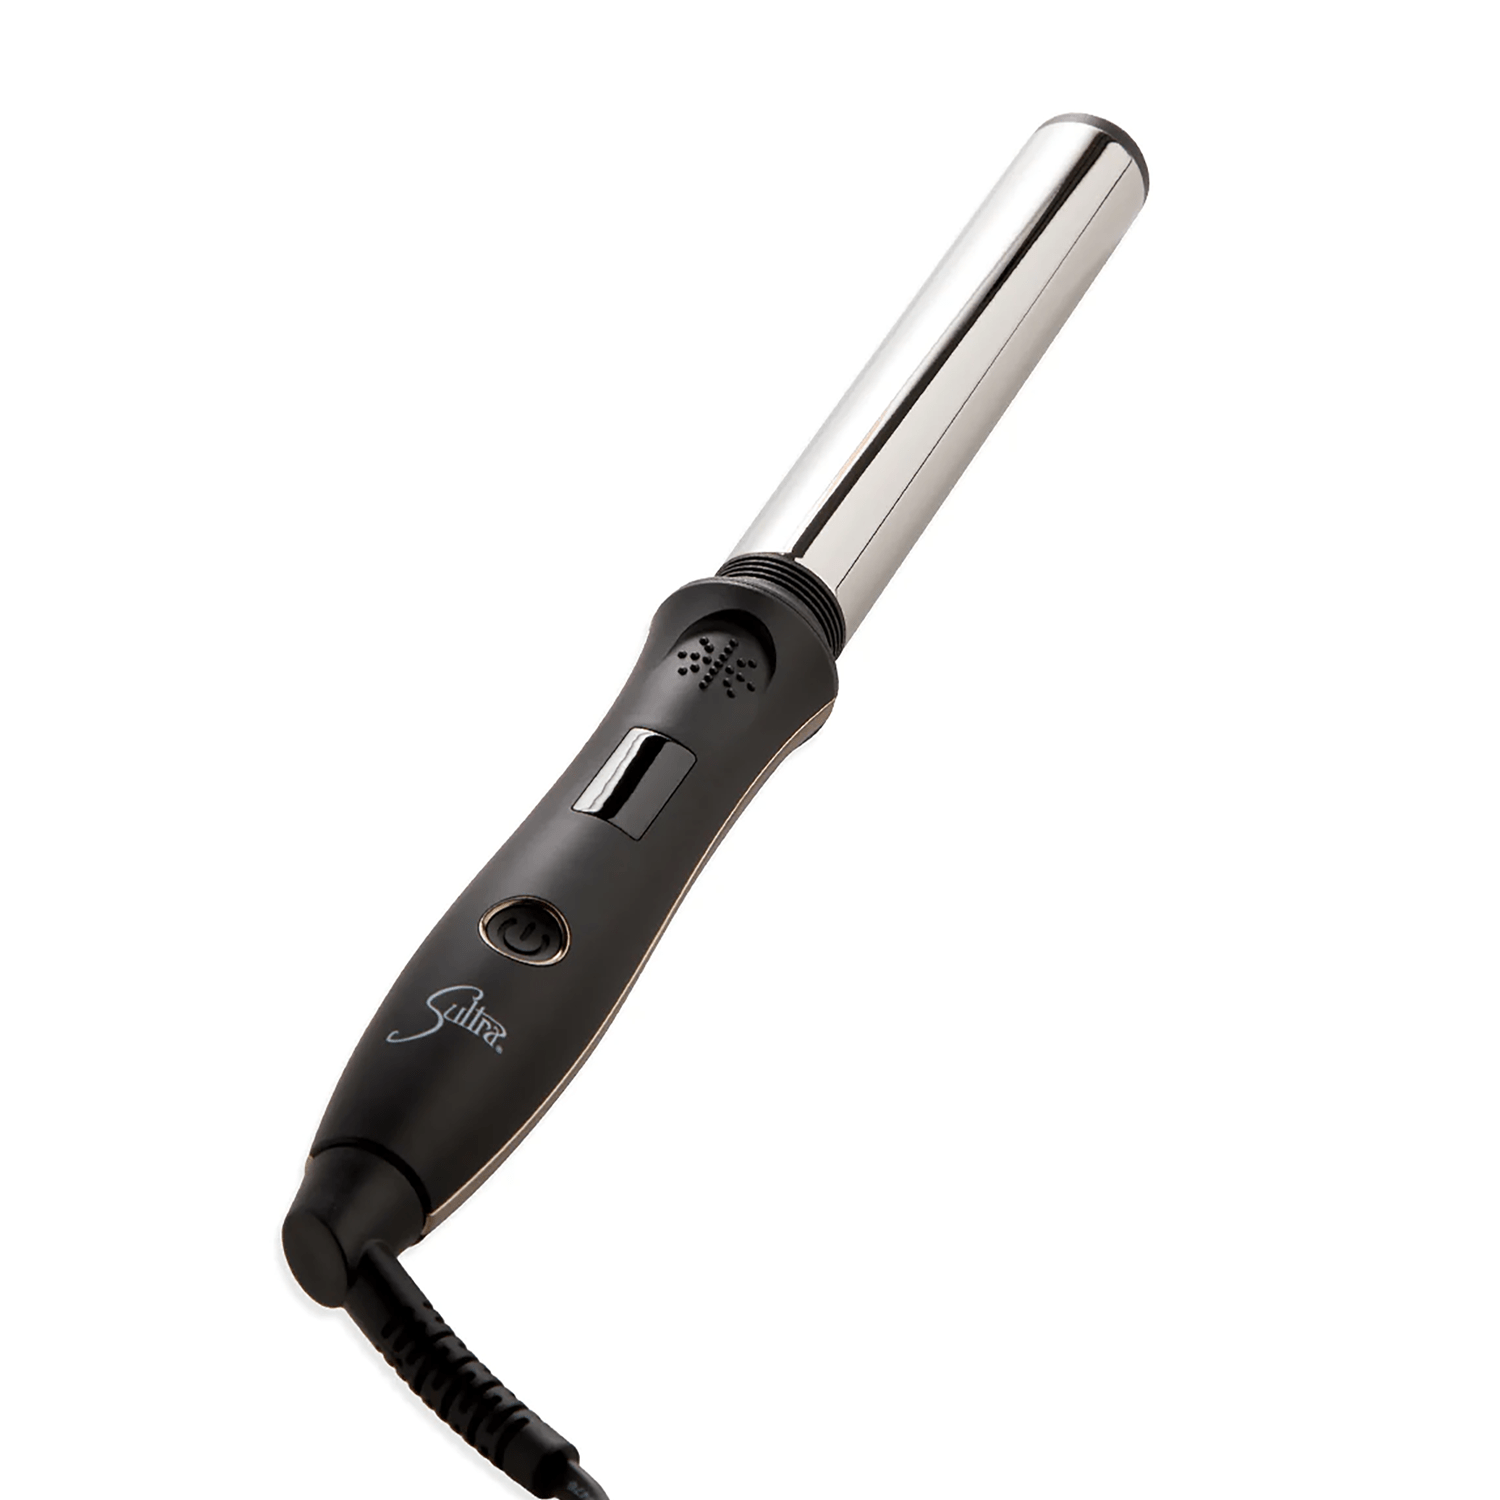 Sultra hair wand Long-lasting curls